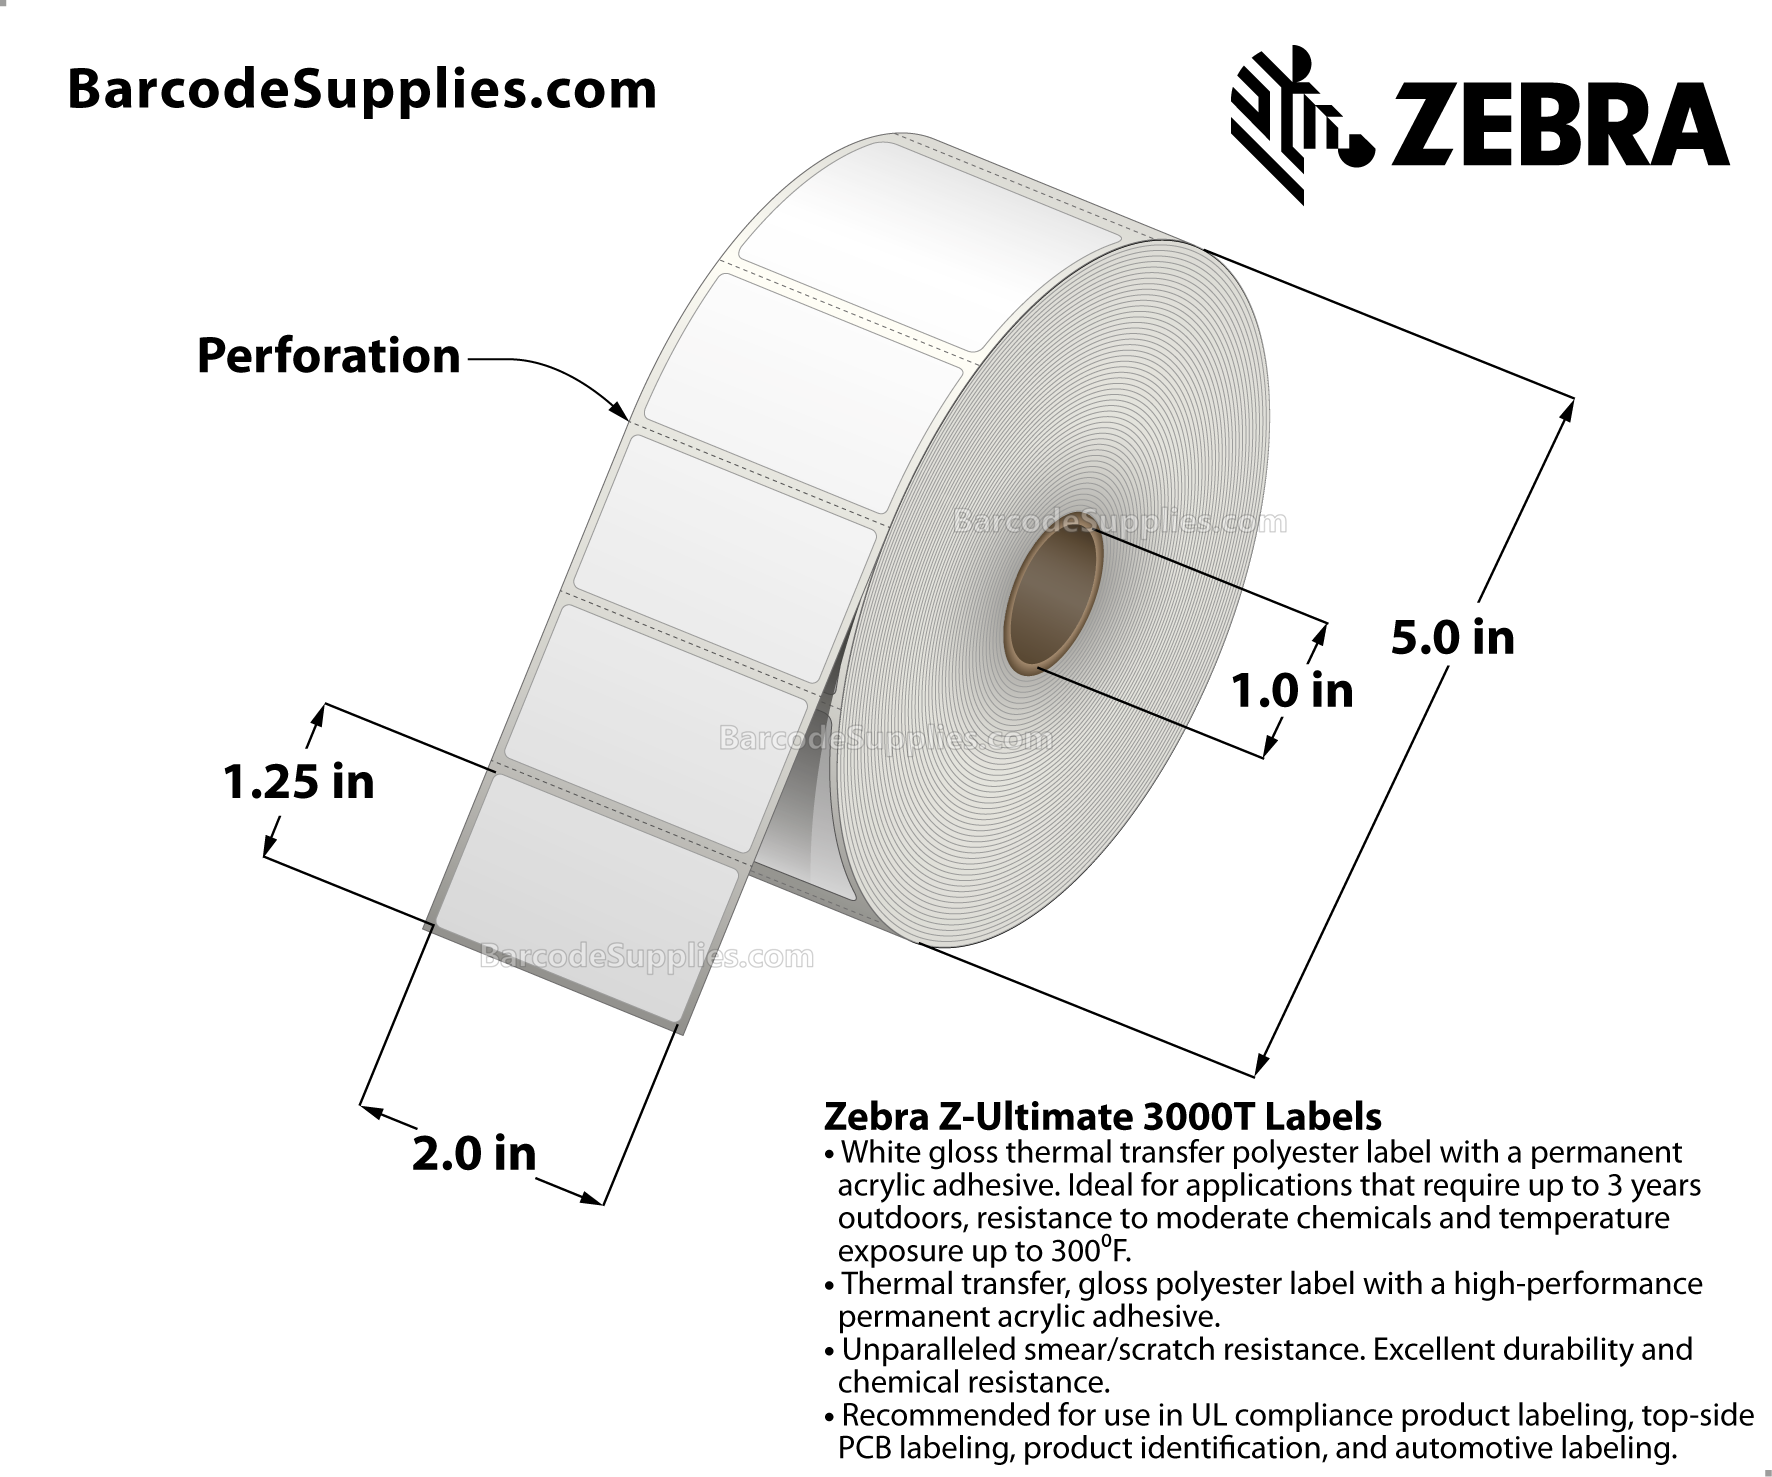 2 x 1.25 Thermal Transfer White Z-Ultimate 3000T Labels With Permanent Adhesive - Perforated - 2070 Labels Per Roll - Carton Of 8 Rolls - 16560 Labels Total - MPN: 18940